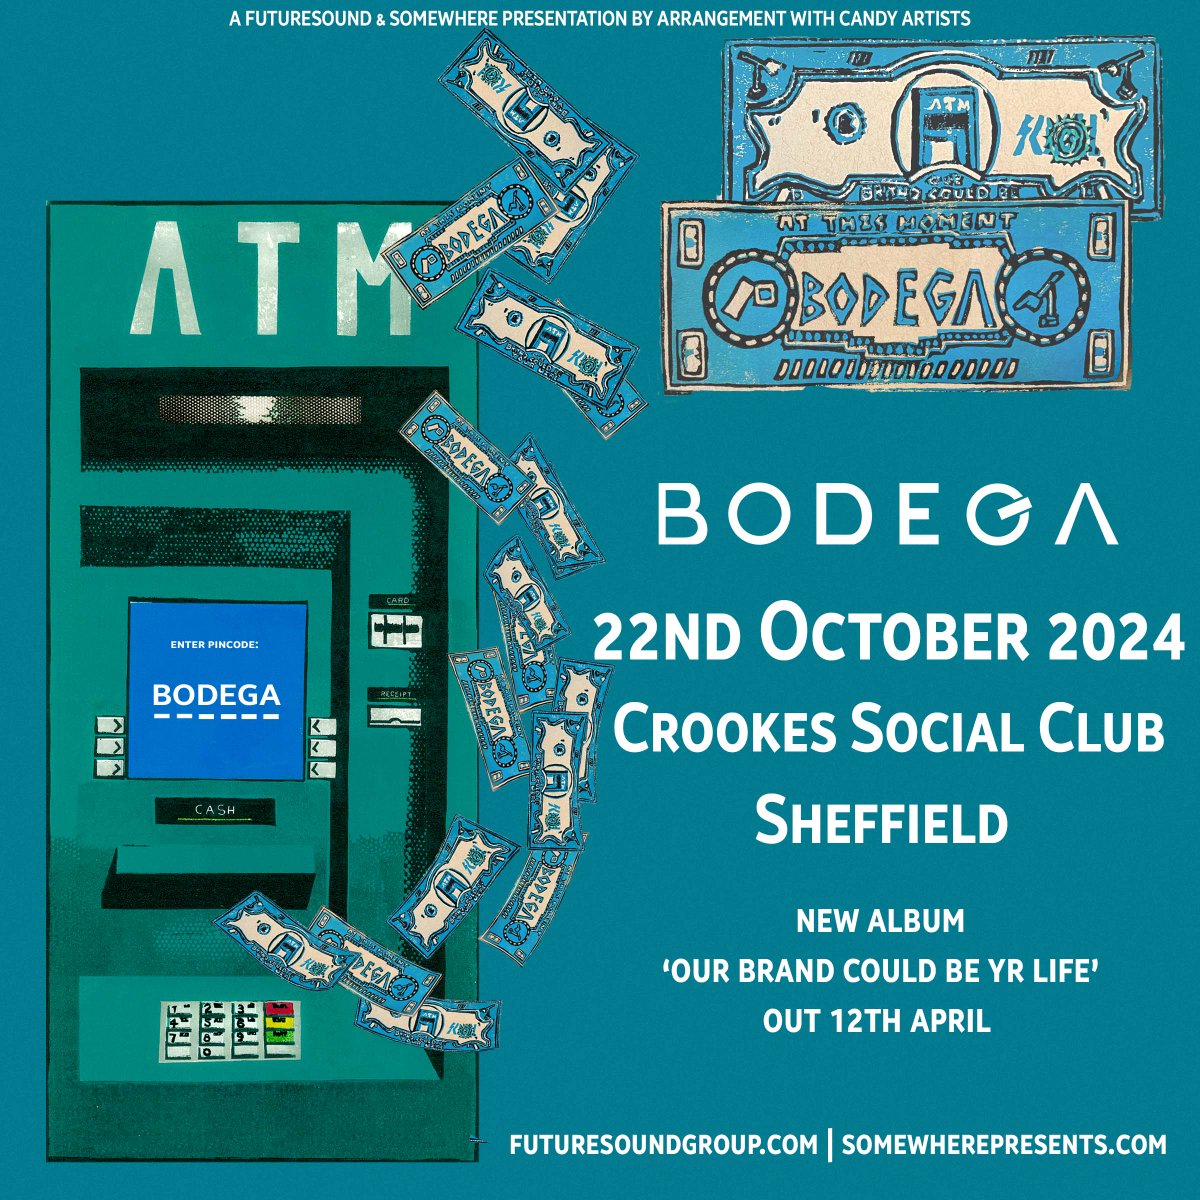 Bodega head to @CrookesSocial, Sheffield on October 22nd. Tickets on sale Friday 10am - somewherepresents.com